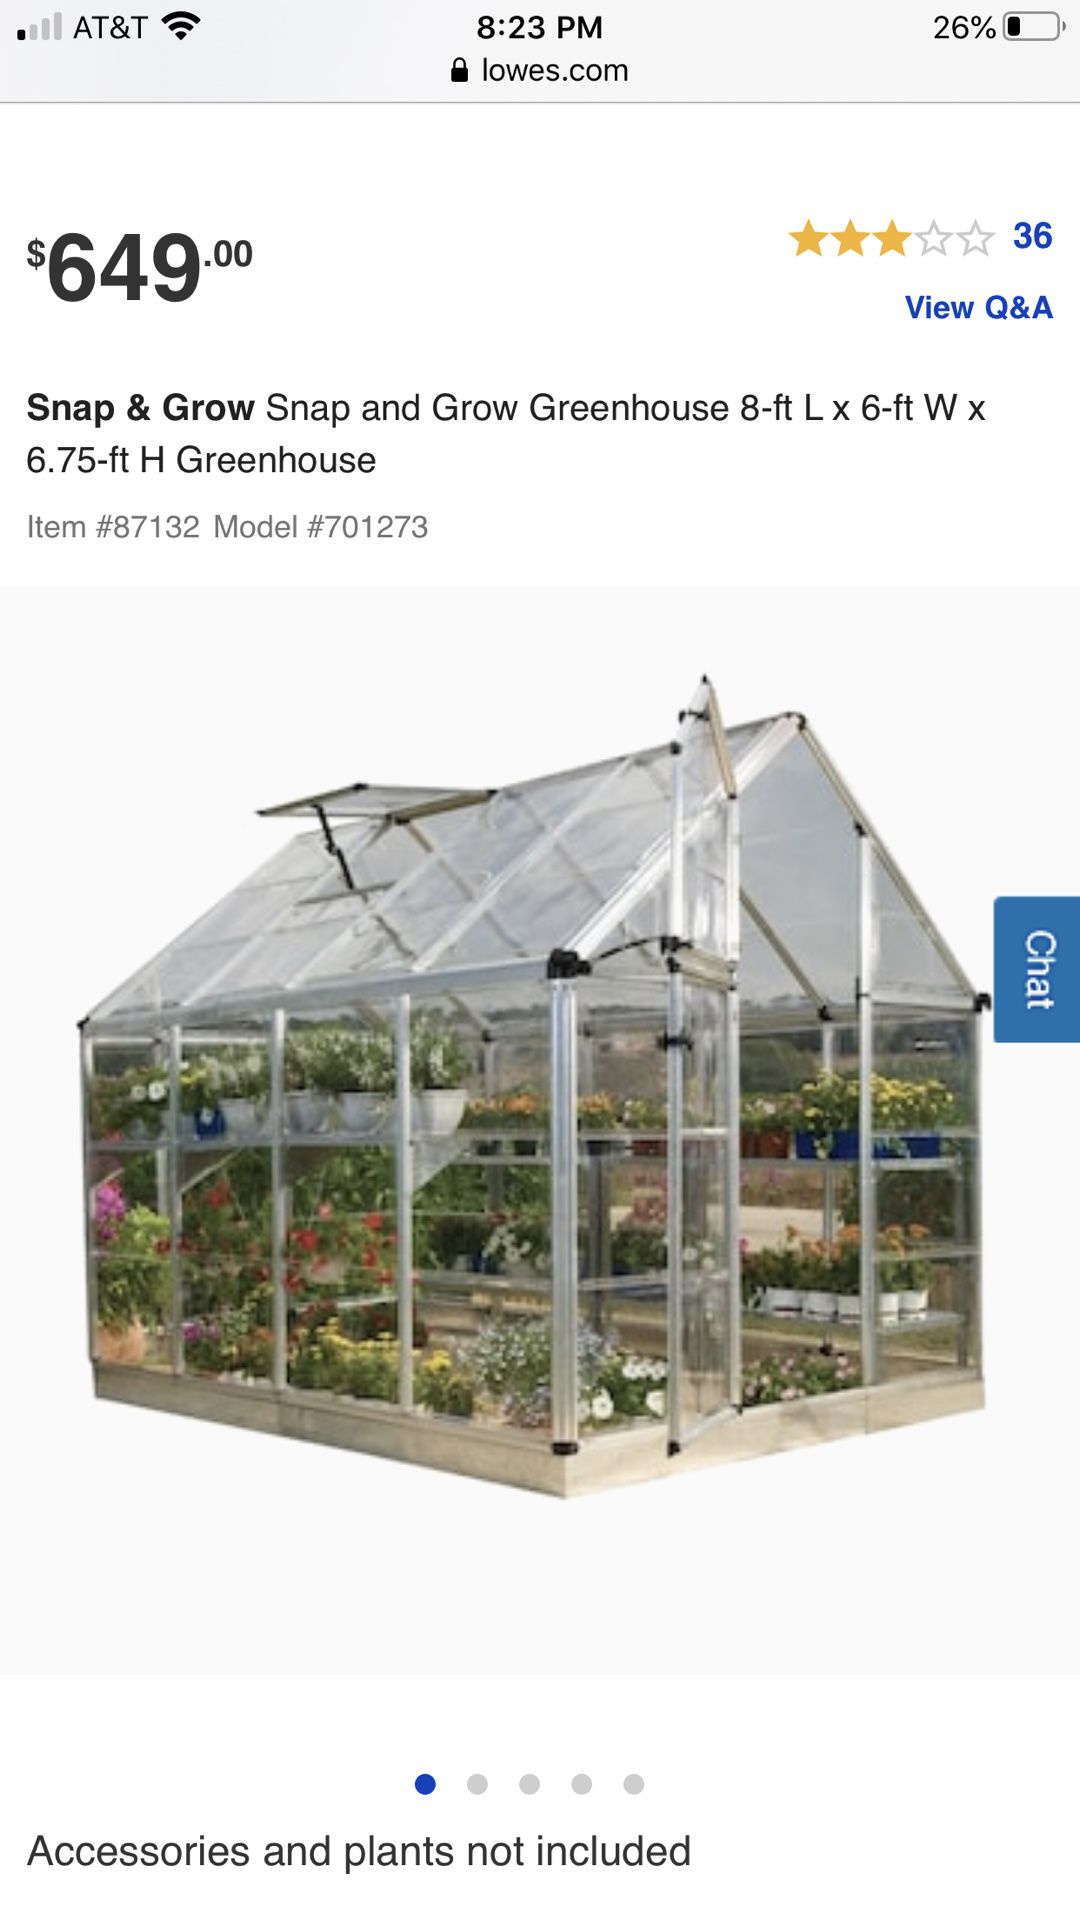 Snap & Grow Snap and Grow Greenhouse 8-ft L x 6-ft W x 6.75-ft H Greenhouse